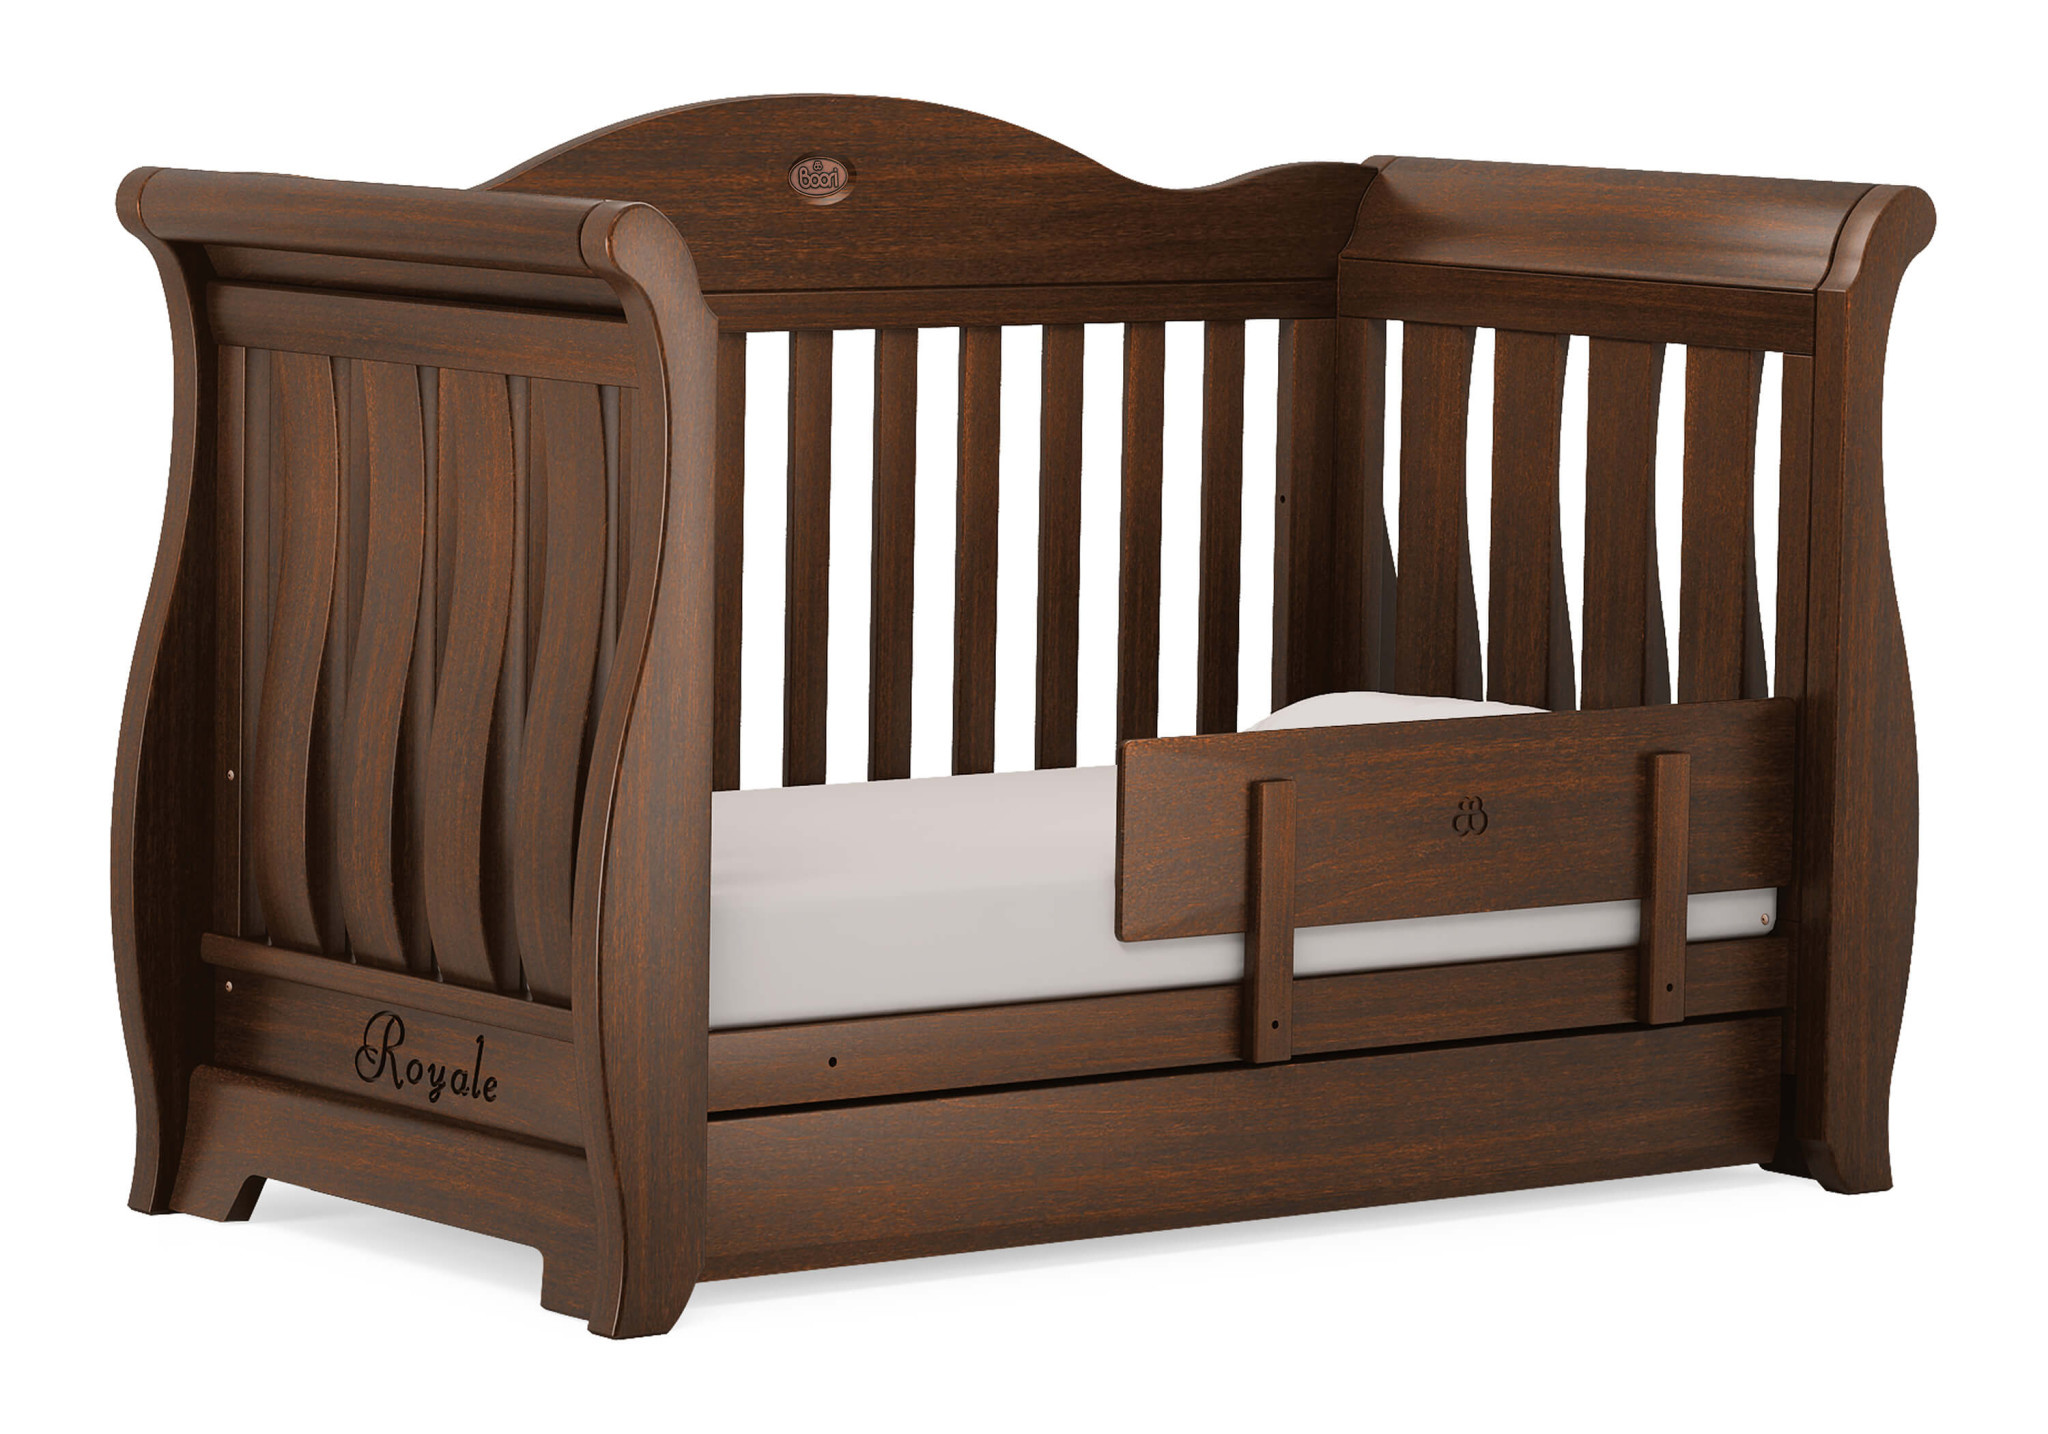 Boori Boori Sleigh Royale Cot Bed (excludes TGP)